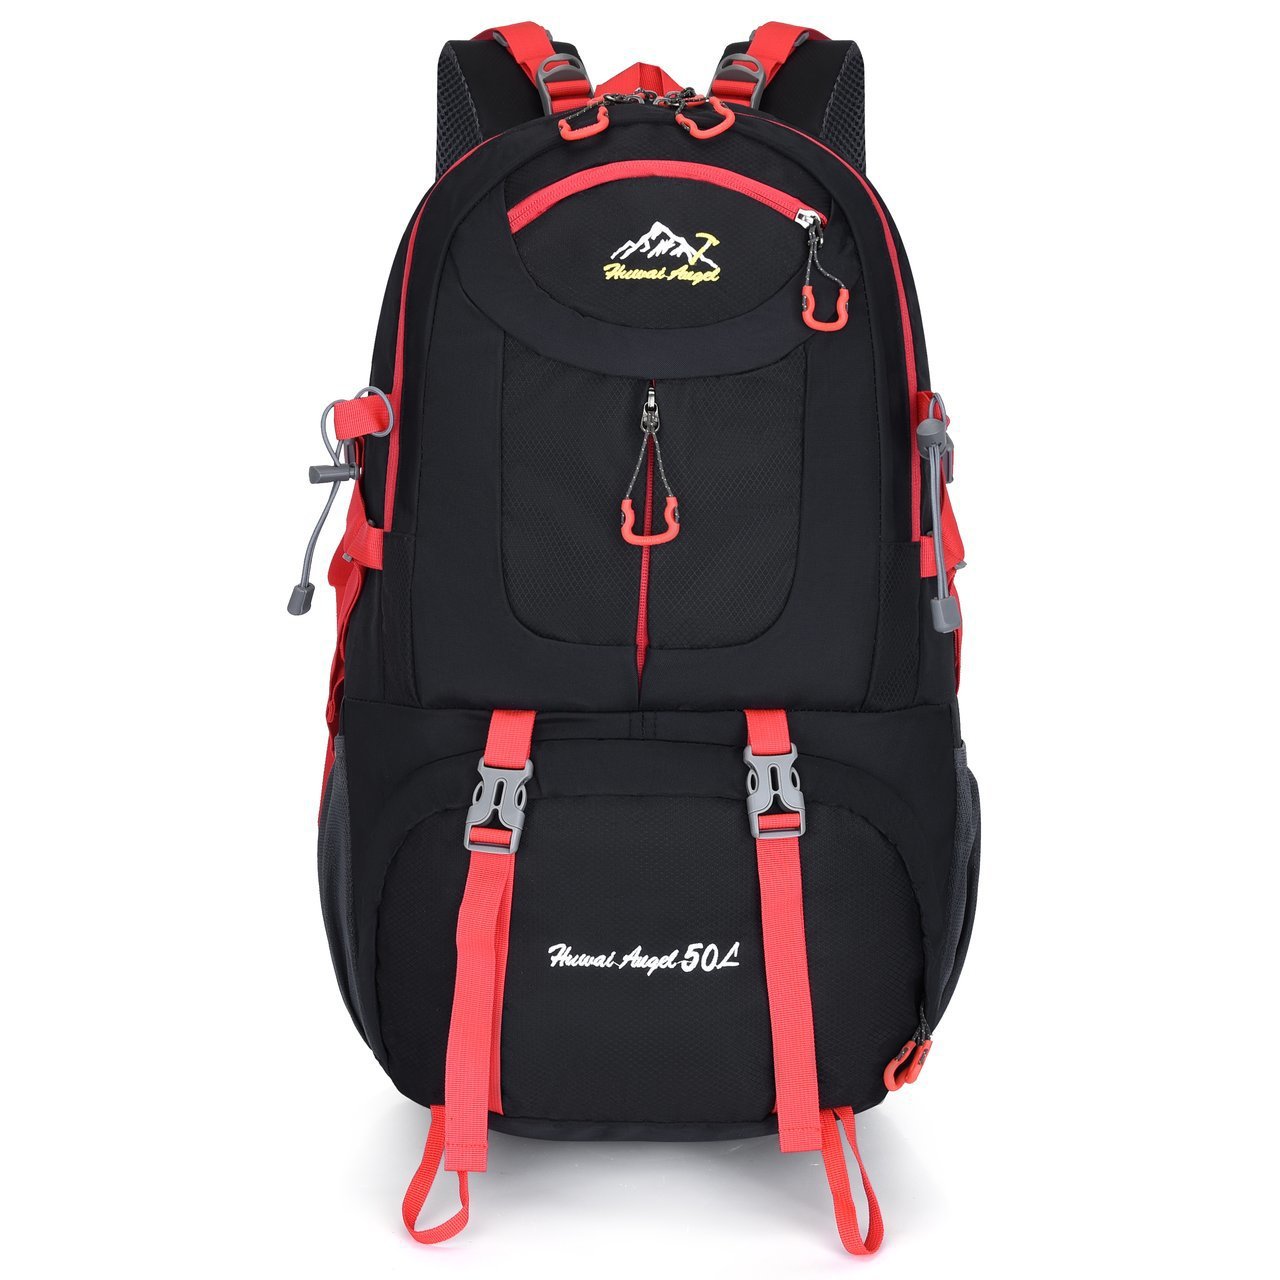 black of outdoor sports trekking hiking travel bags backpack